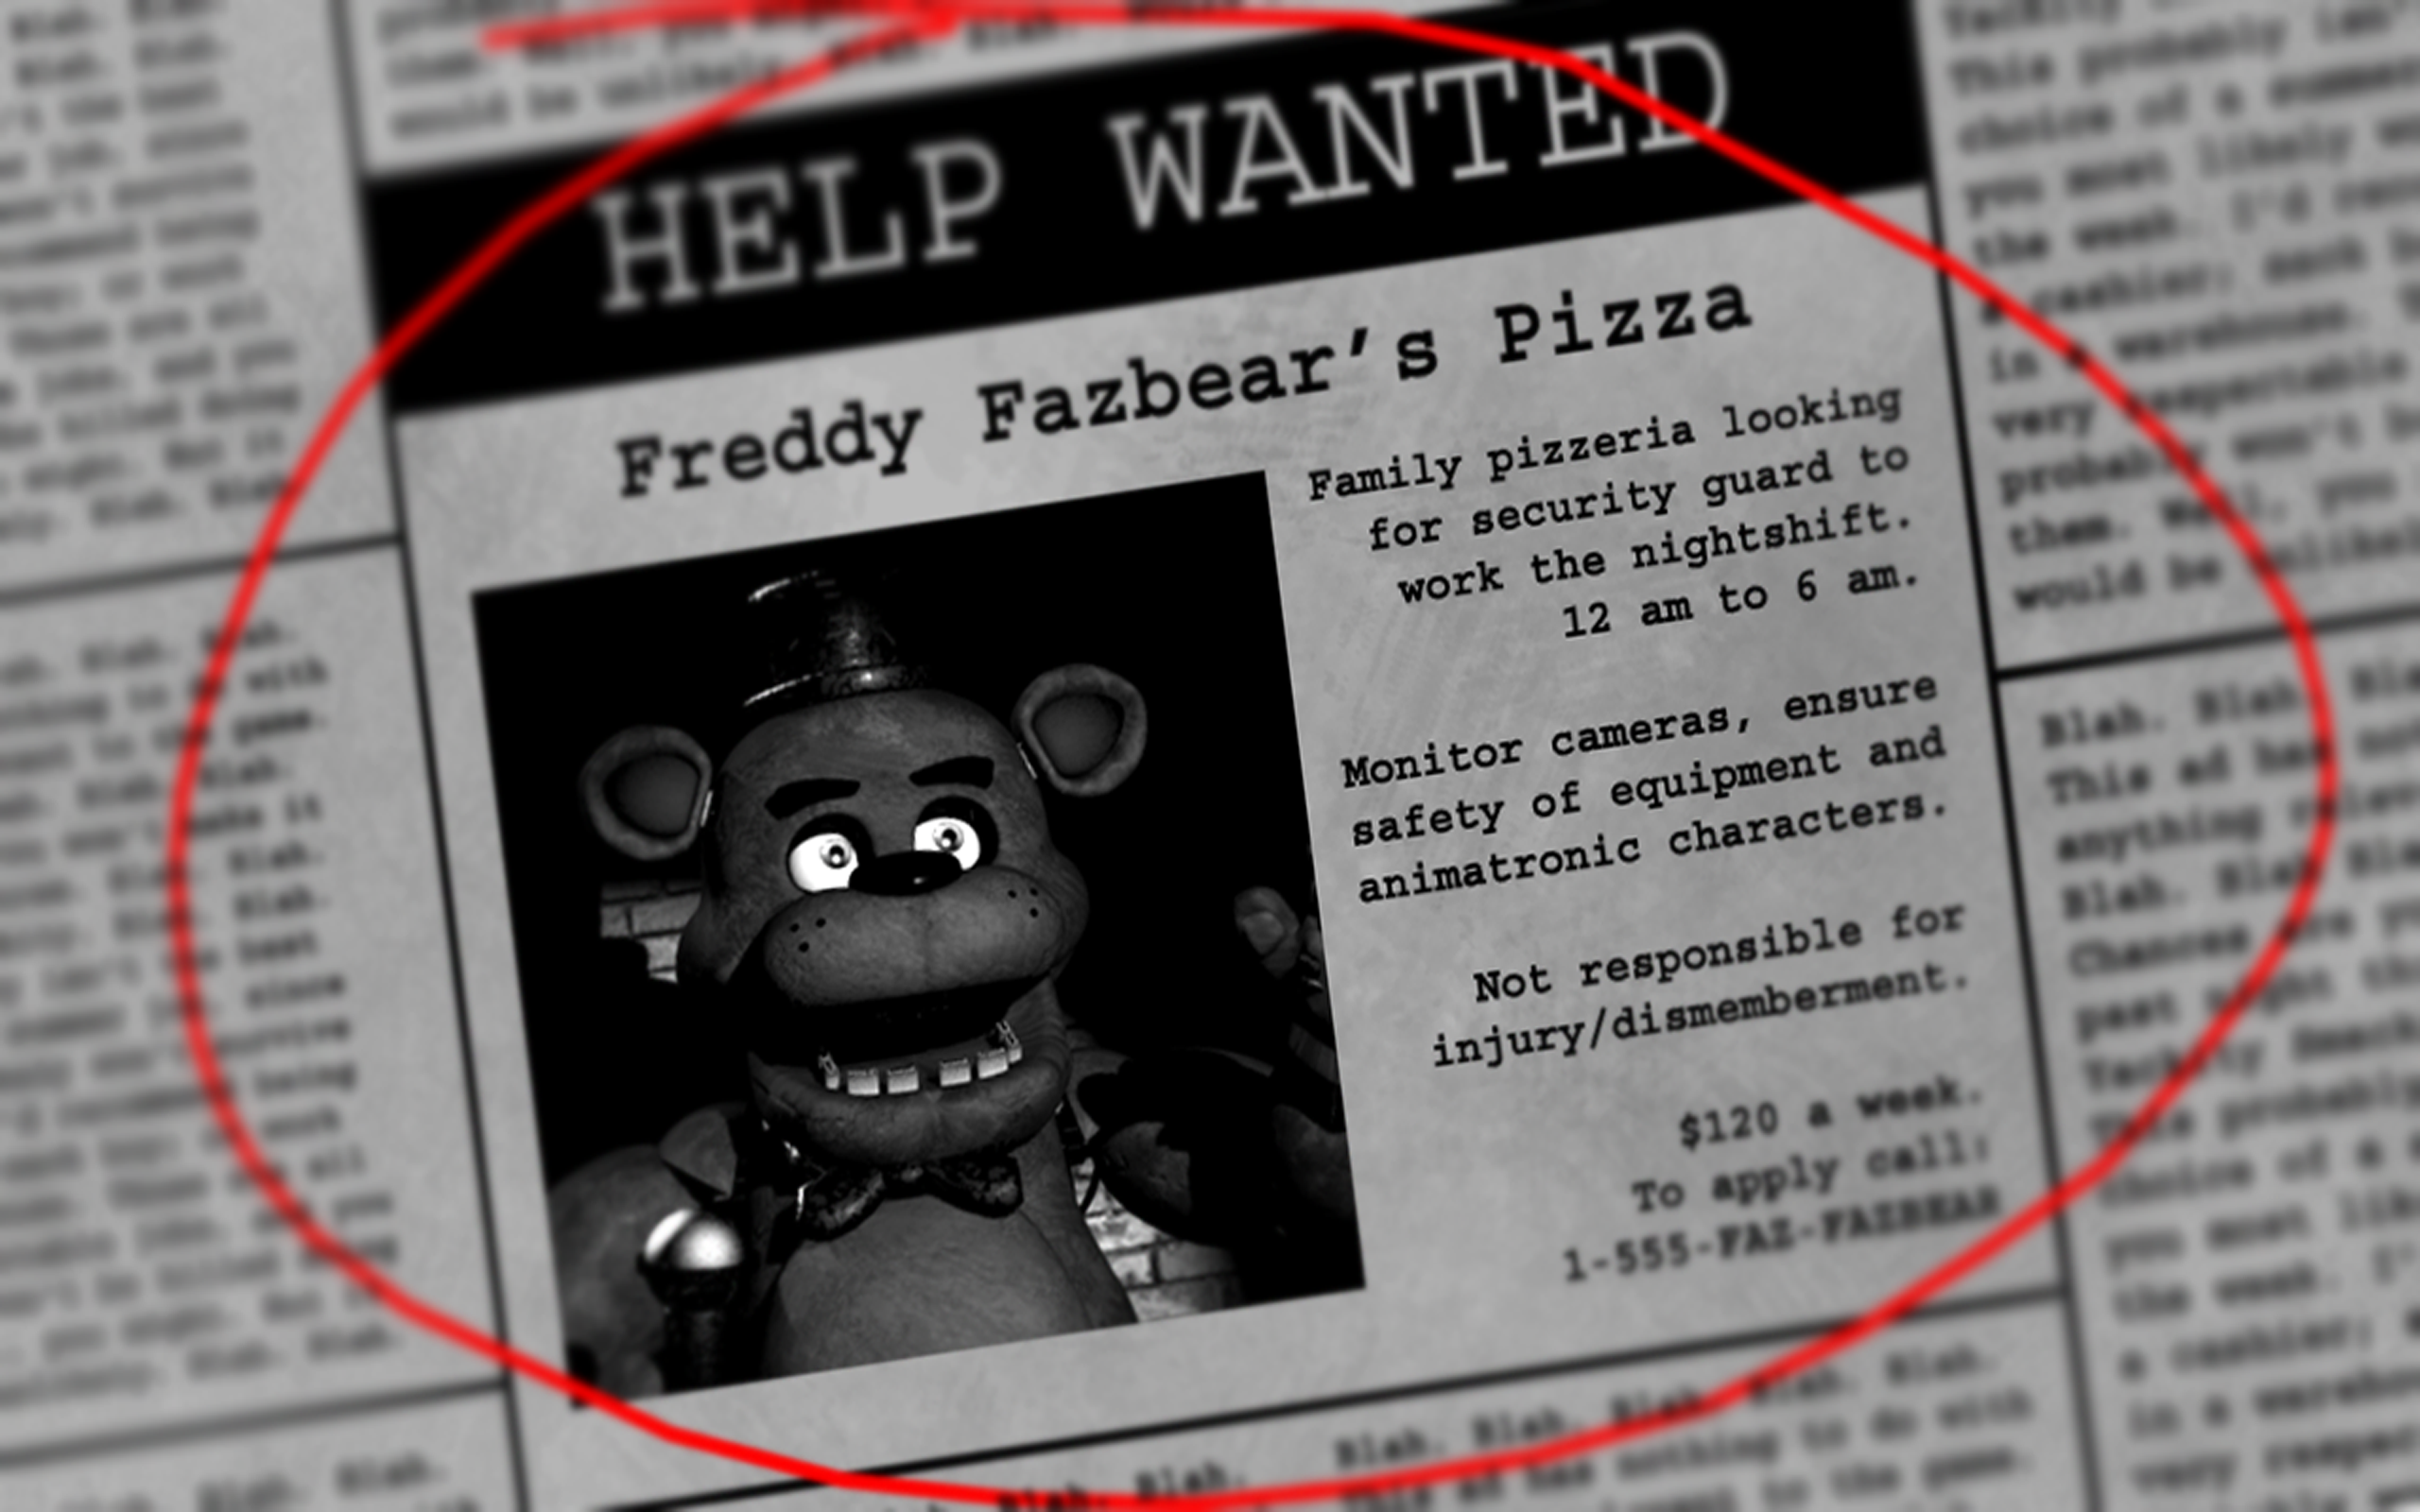 Download and play Five Nights at Freddy's on PC & Mac (Emulator)